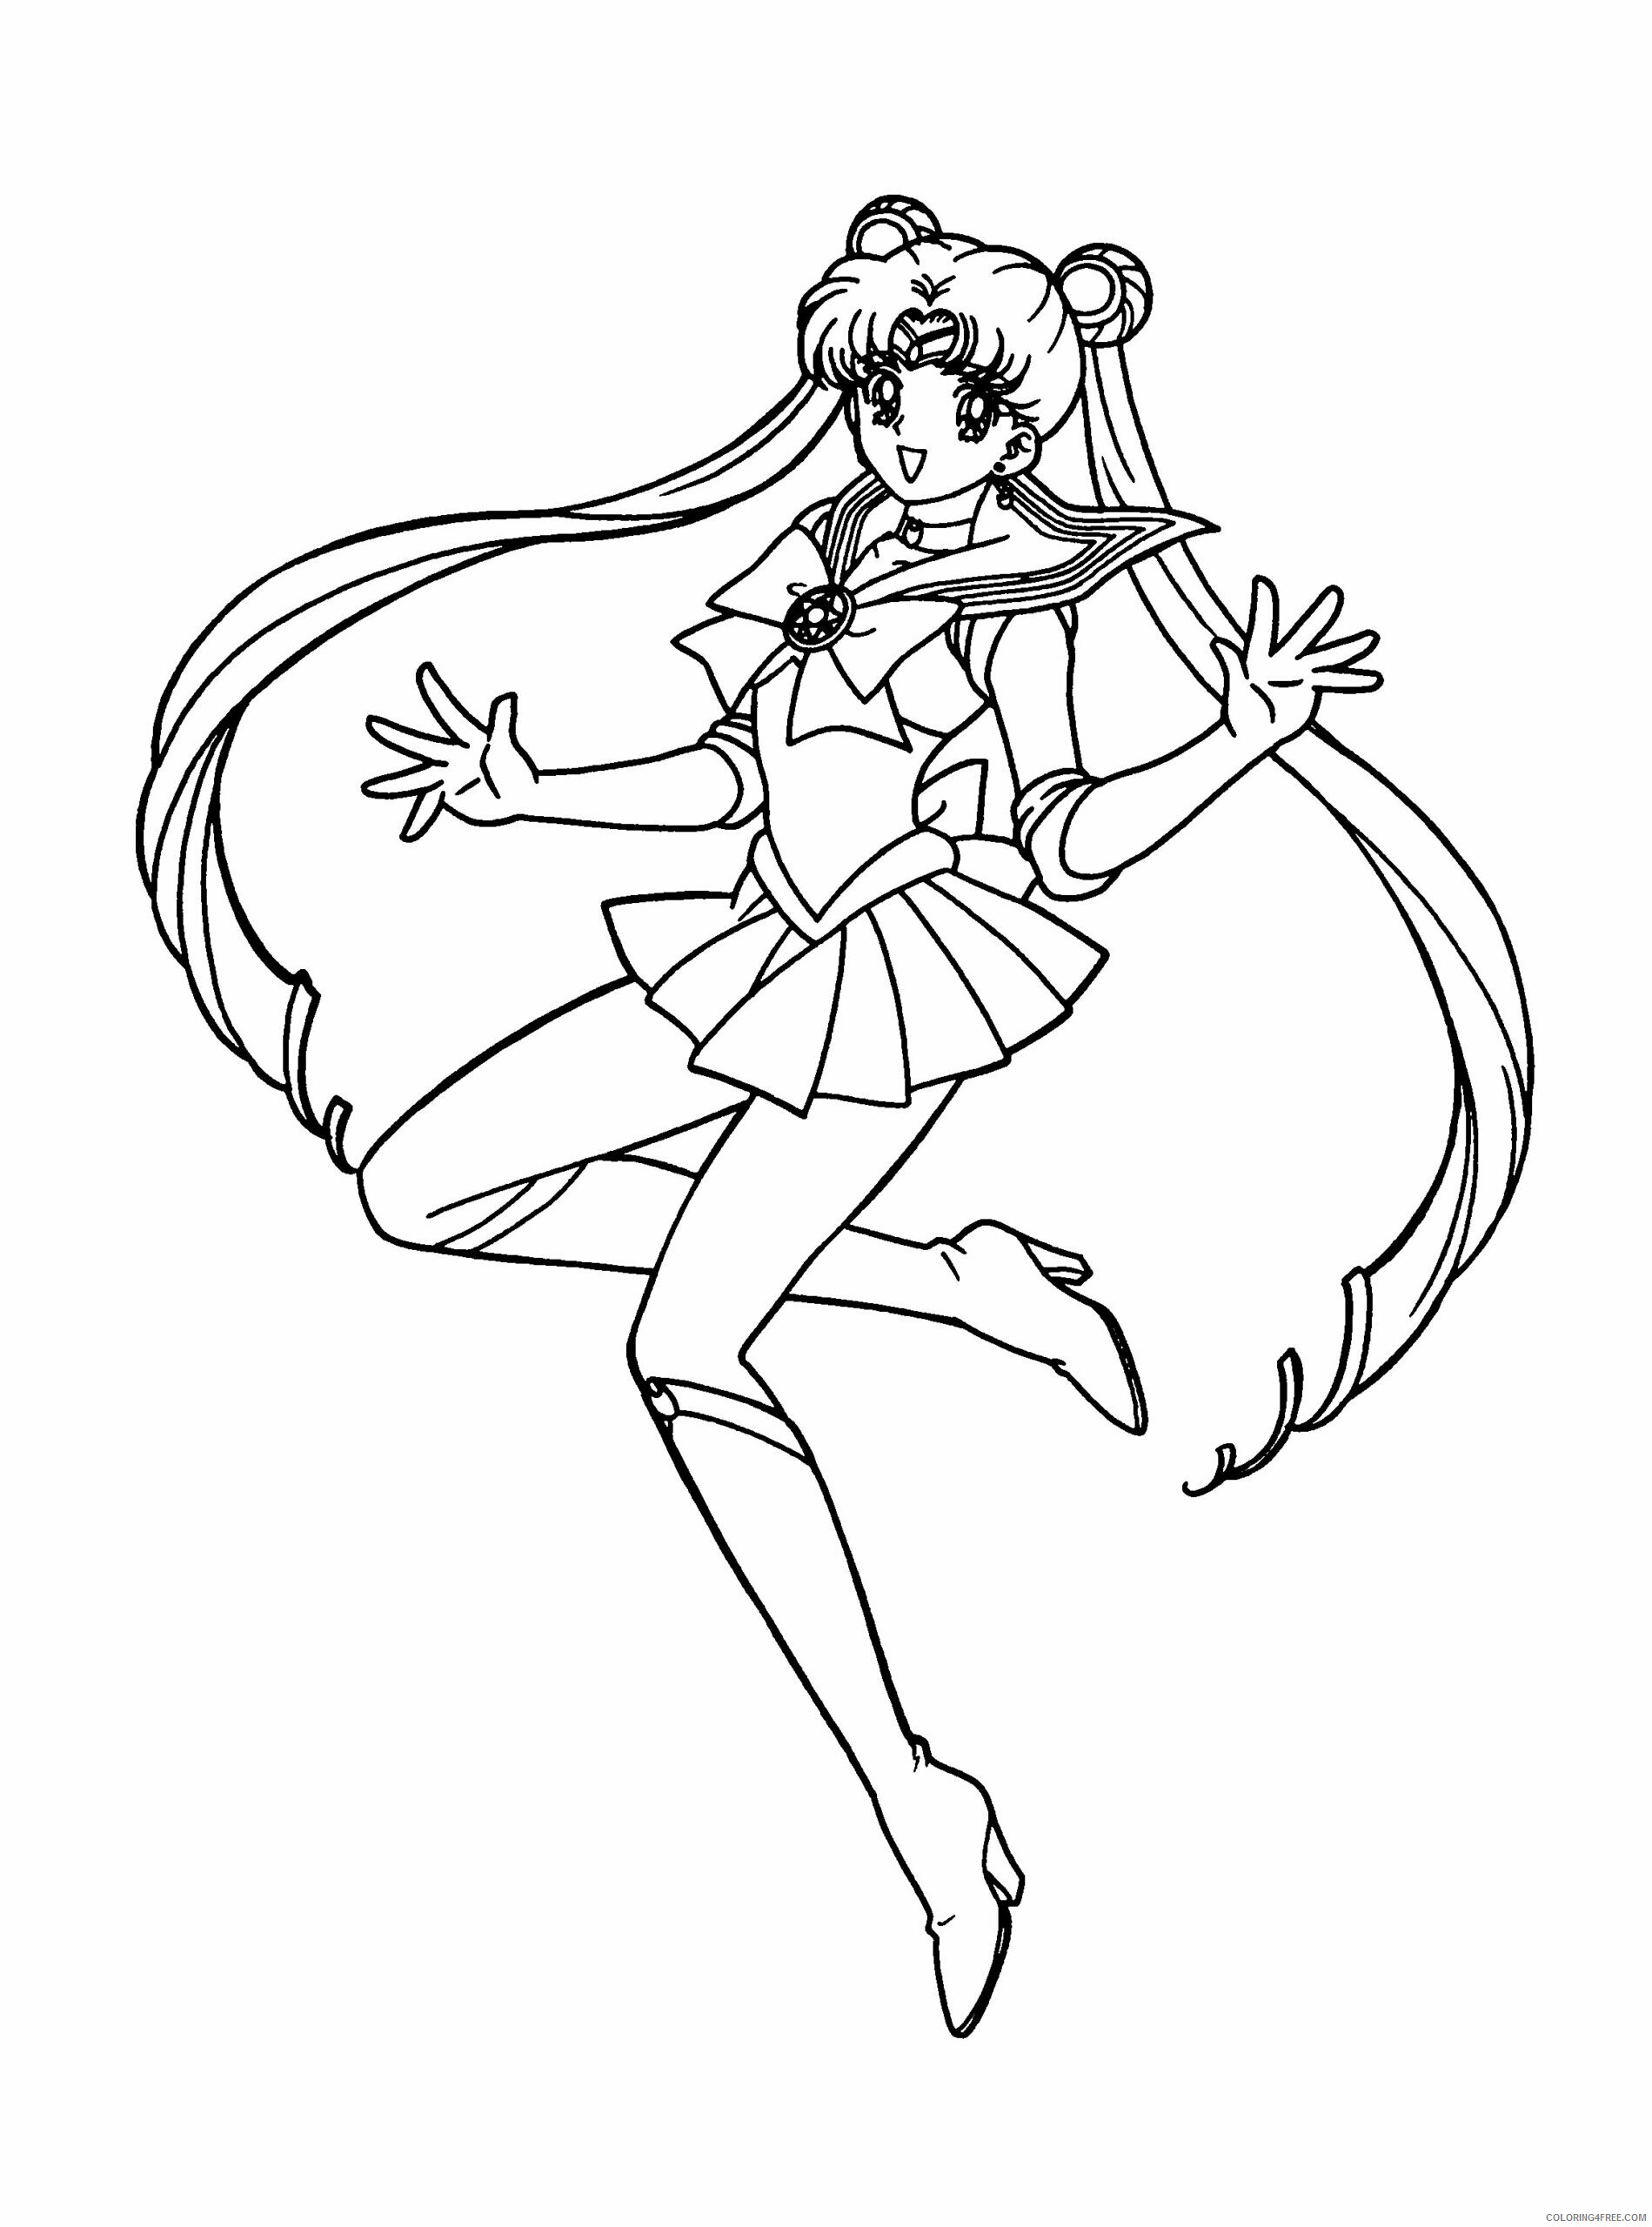 Sailor Moon Printable Coloring Pages Anime sailormoon 5zA40 2021 0982 Coloring4free